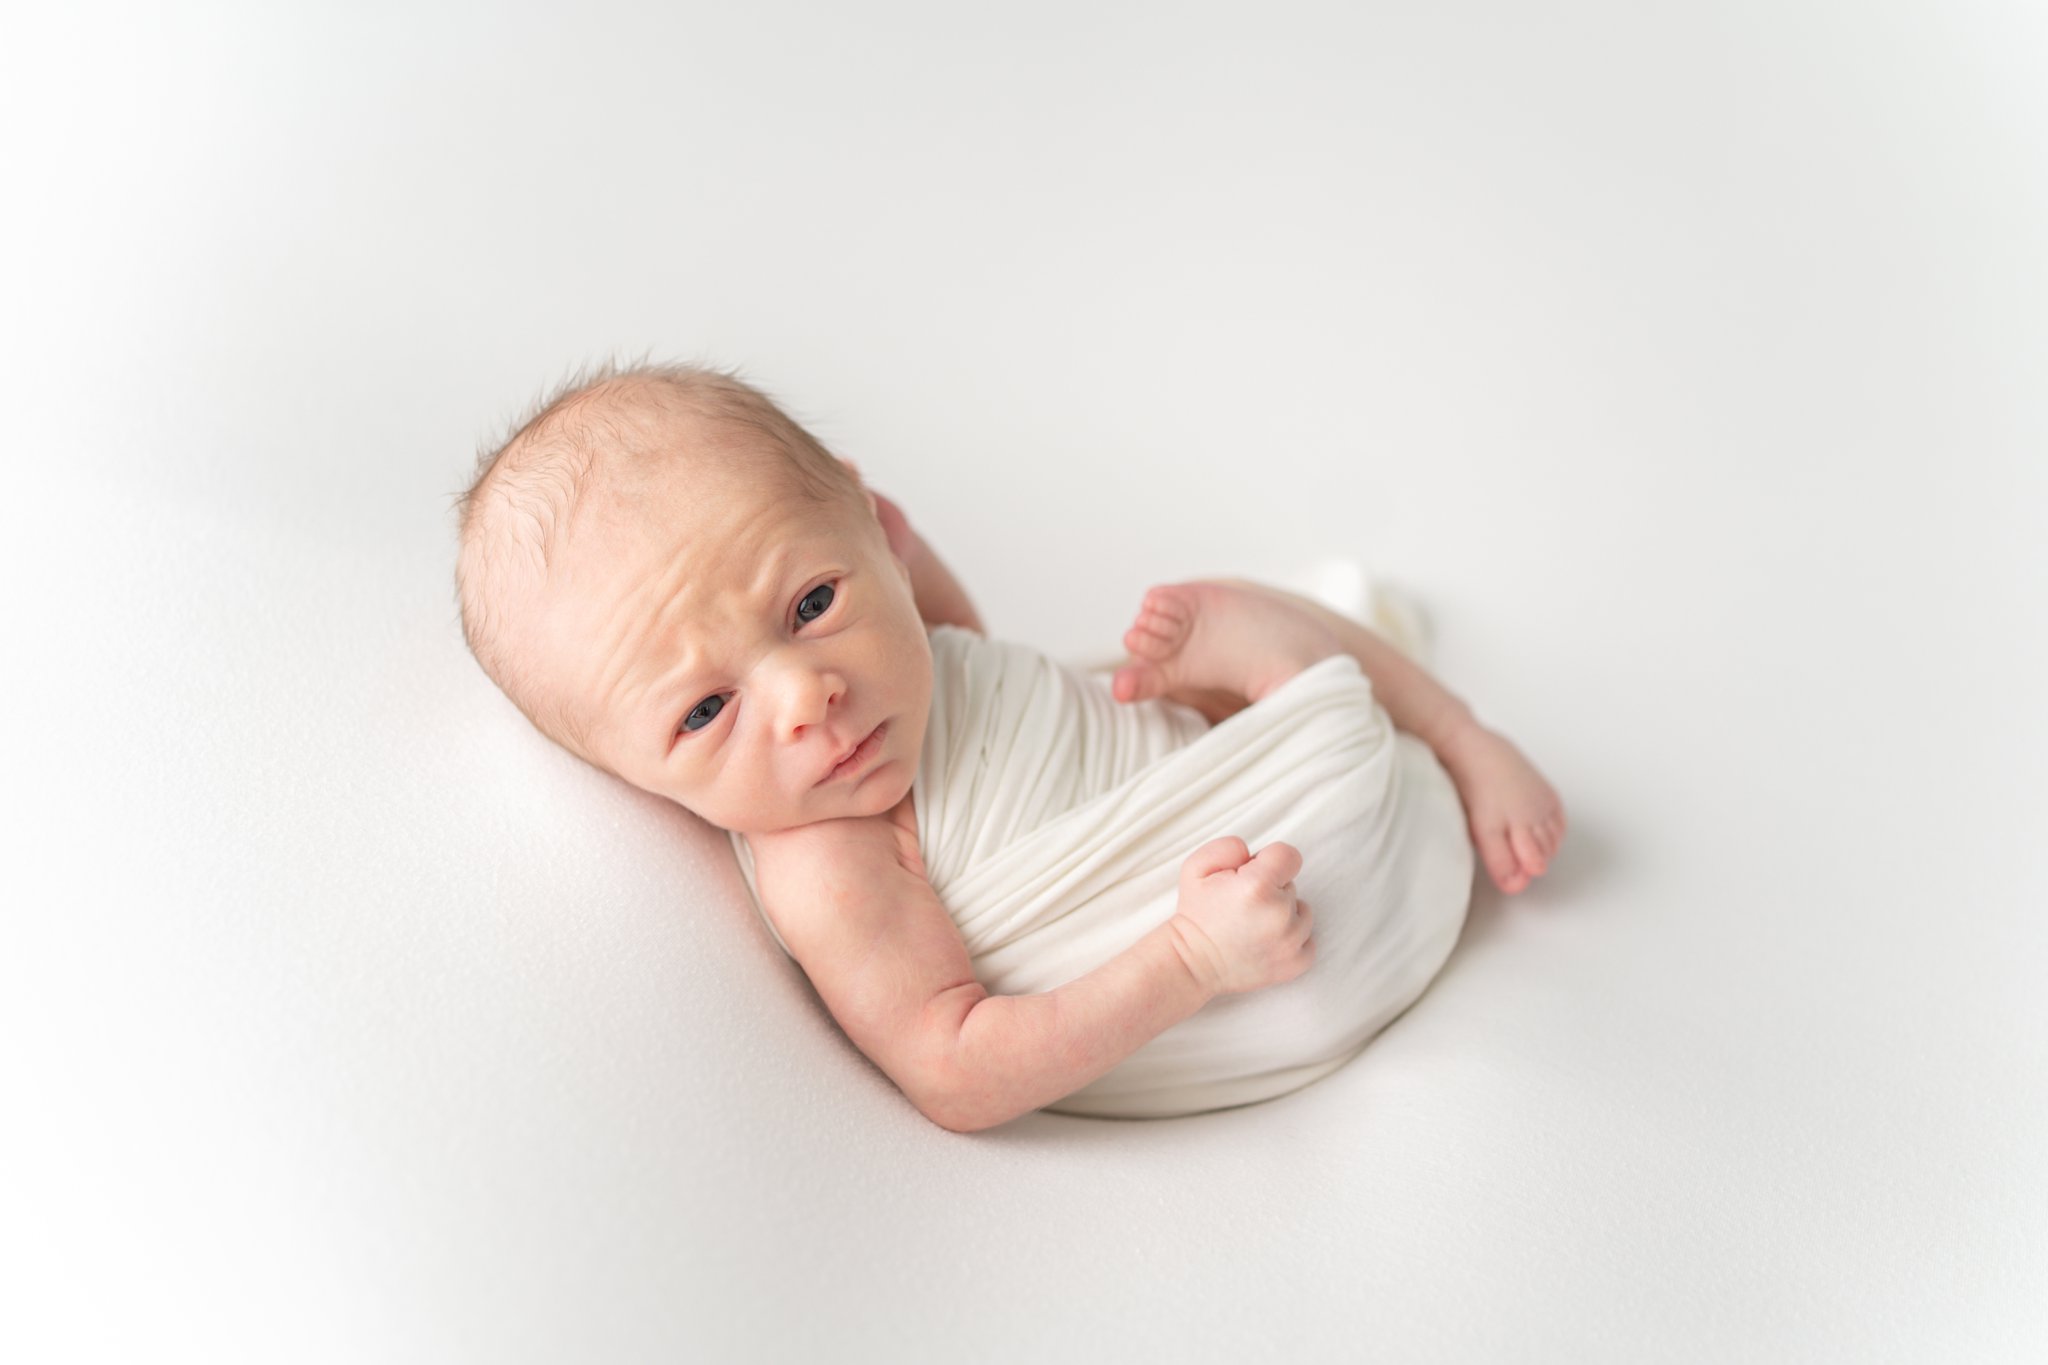 Newborn baby being photographed in south florida photo studio.